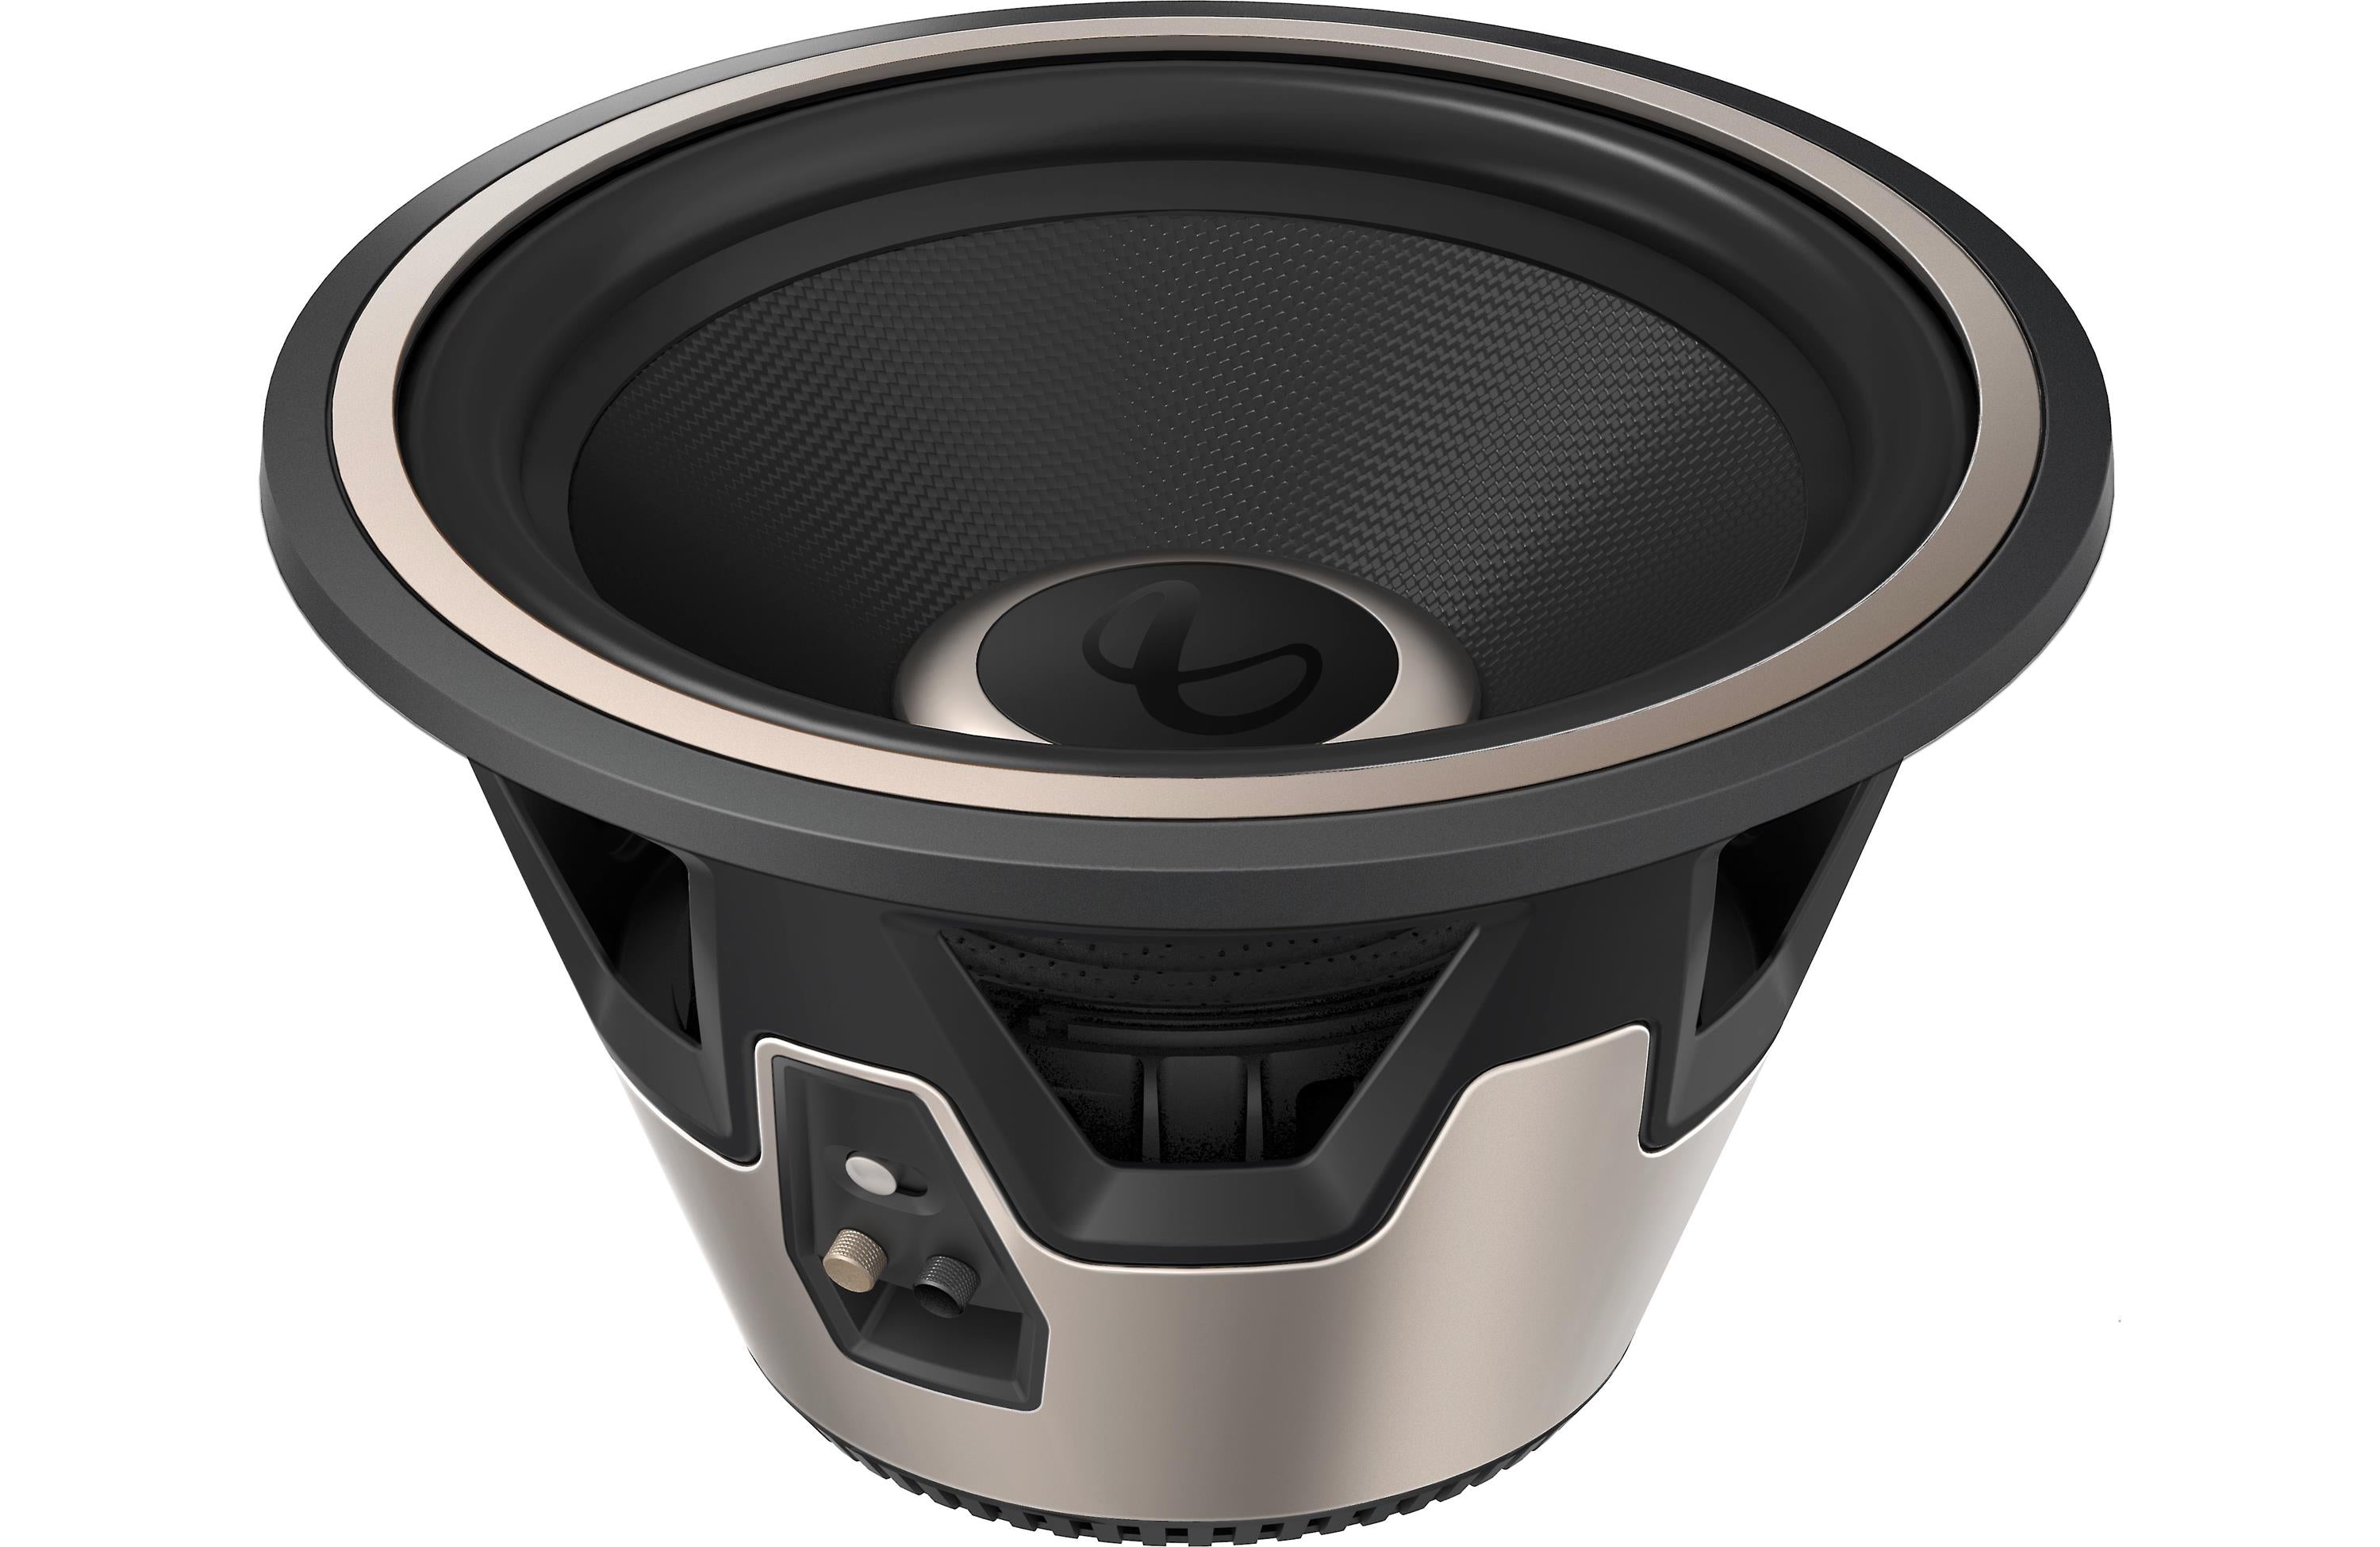 JBL Stage 1210 Subwoofer  12 (300mm) woofer with 250 RMS and 1000W peak  power handling.